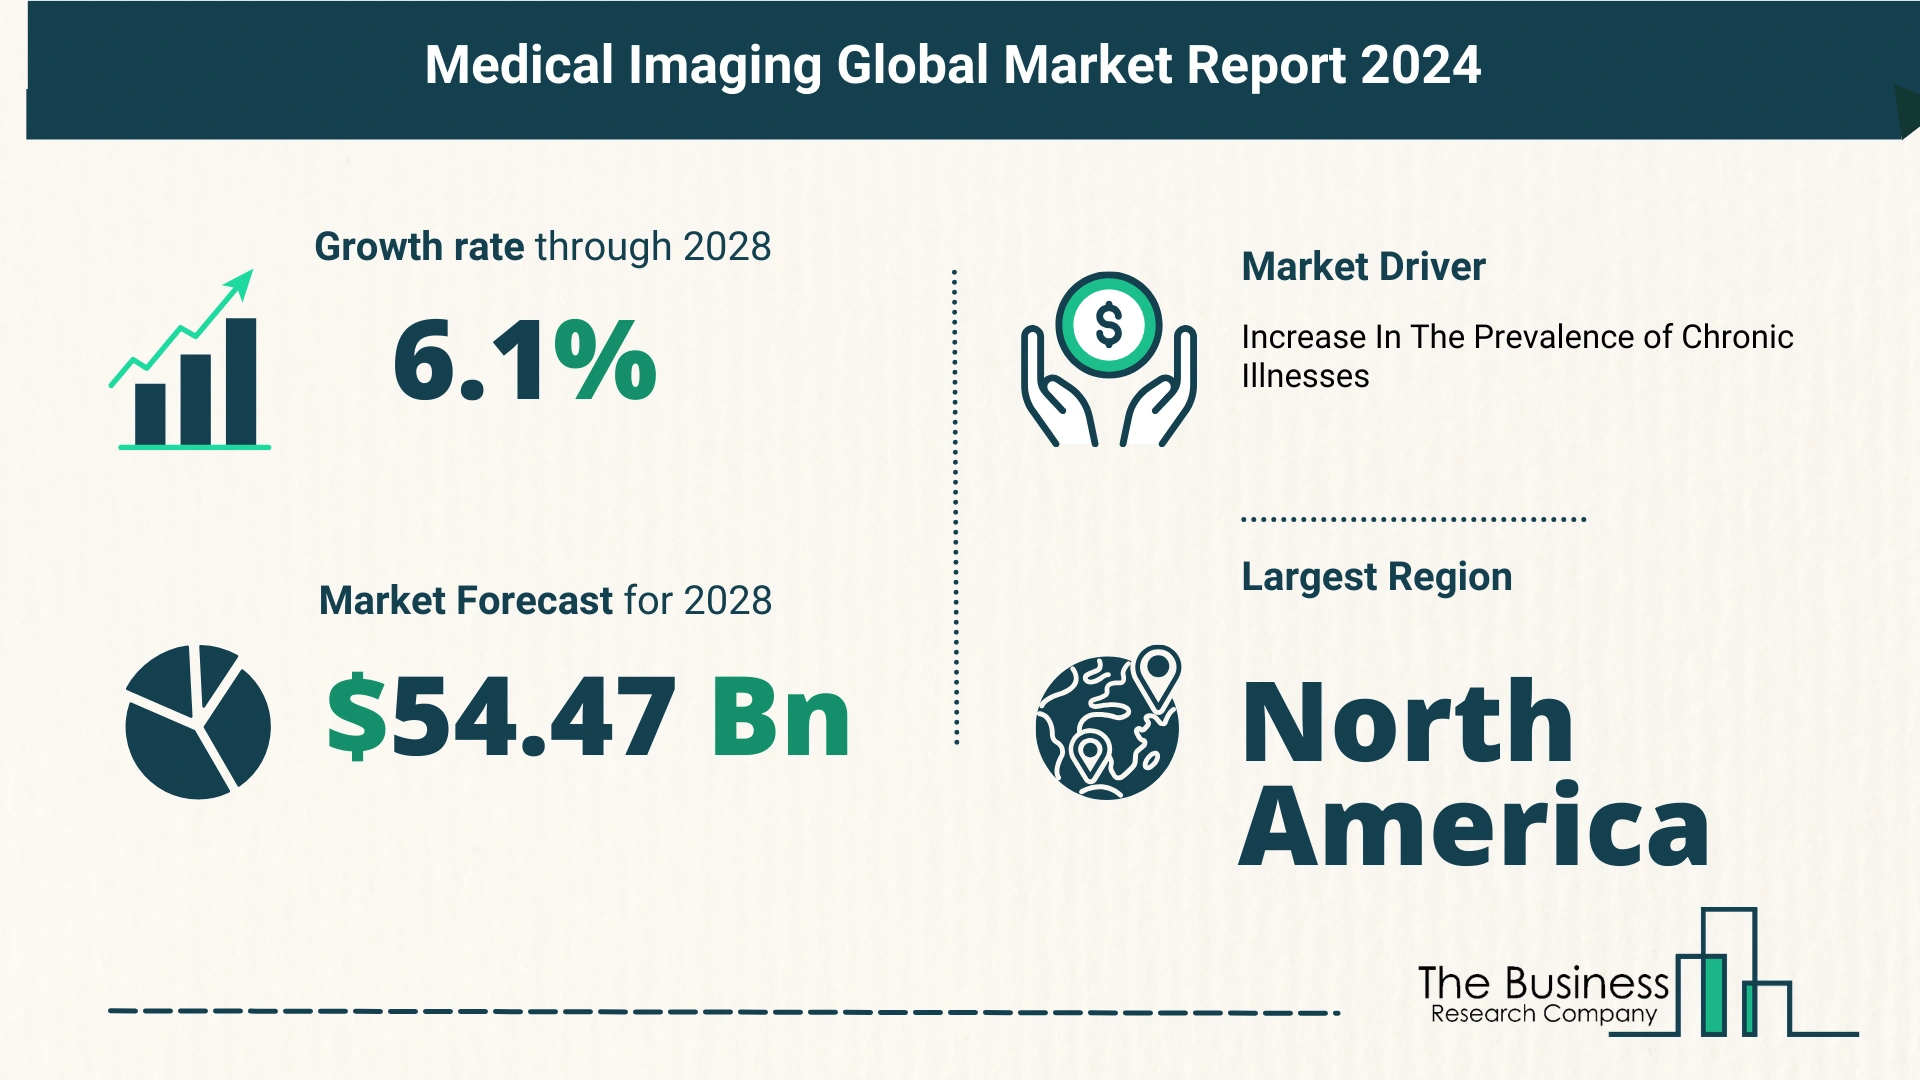 Key Takeaways From The Global Medical Imaging Market Forecast 2024